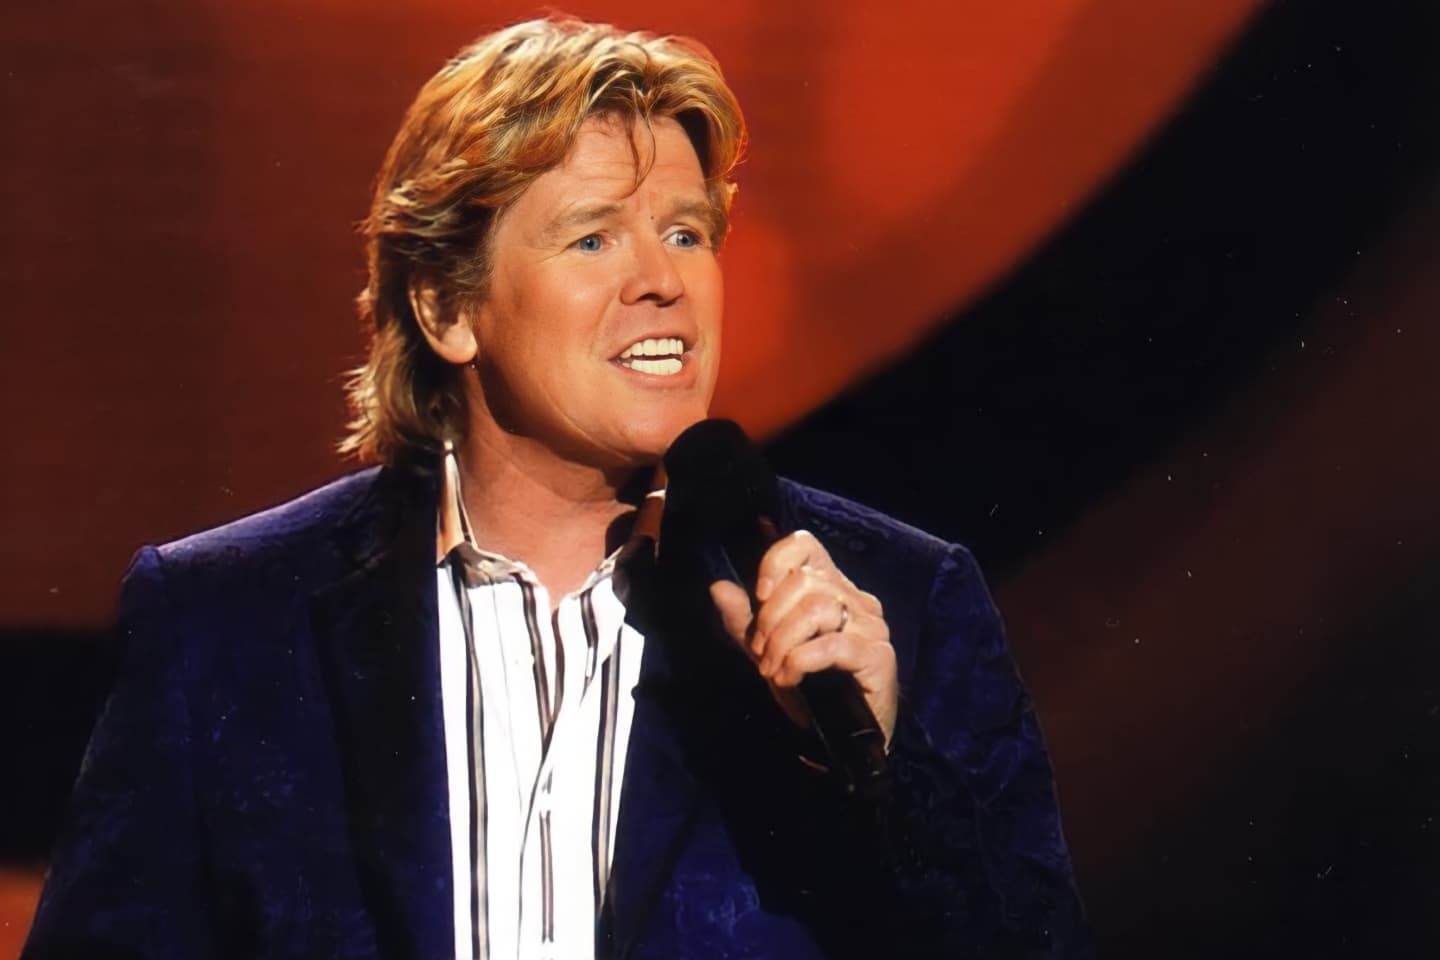 Peter Noone Tickets Peter Noone Tour and Concert Tickets viagogo